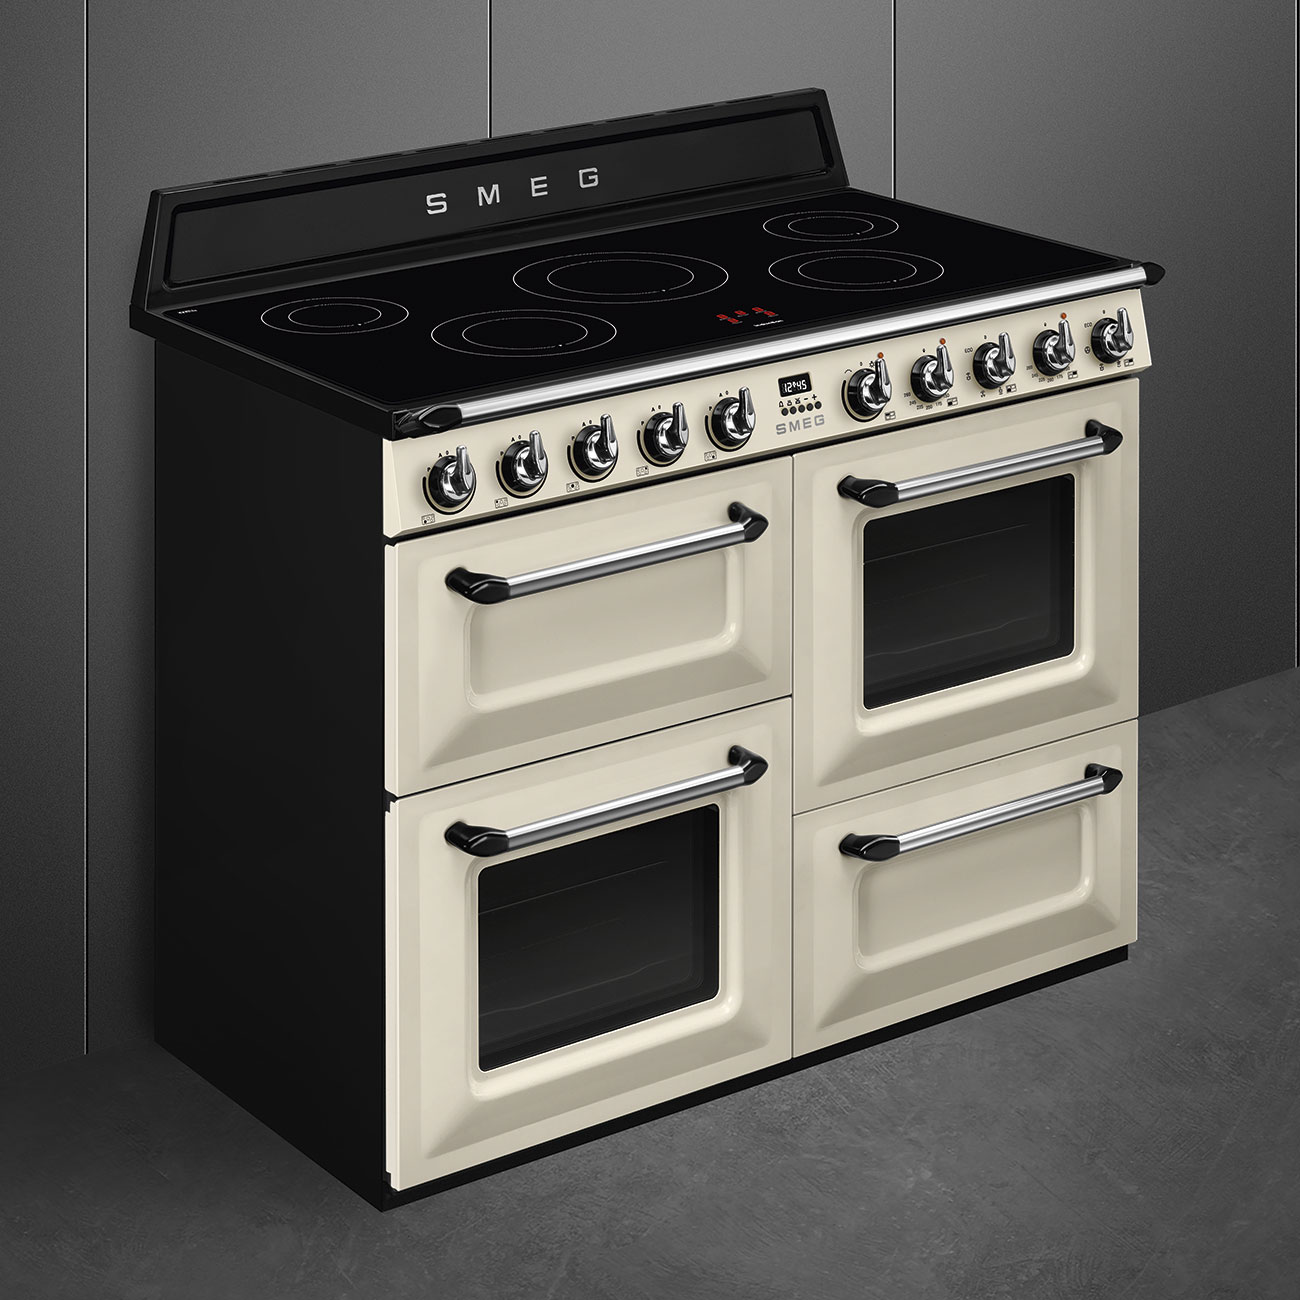 Smeg Cream Cooker with Induction Hob_3